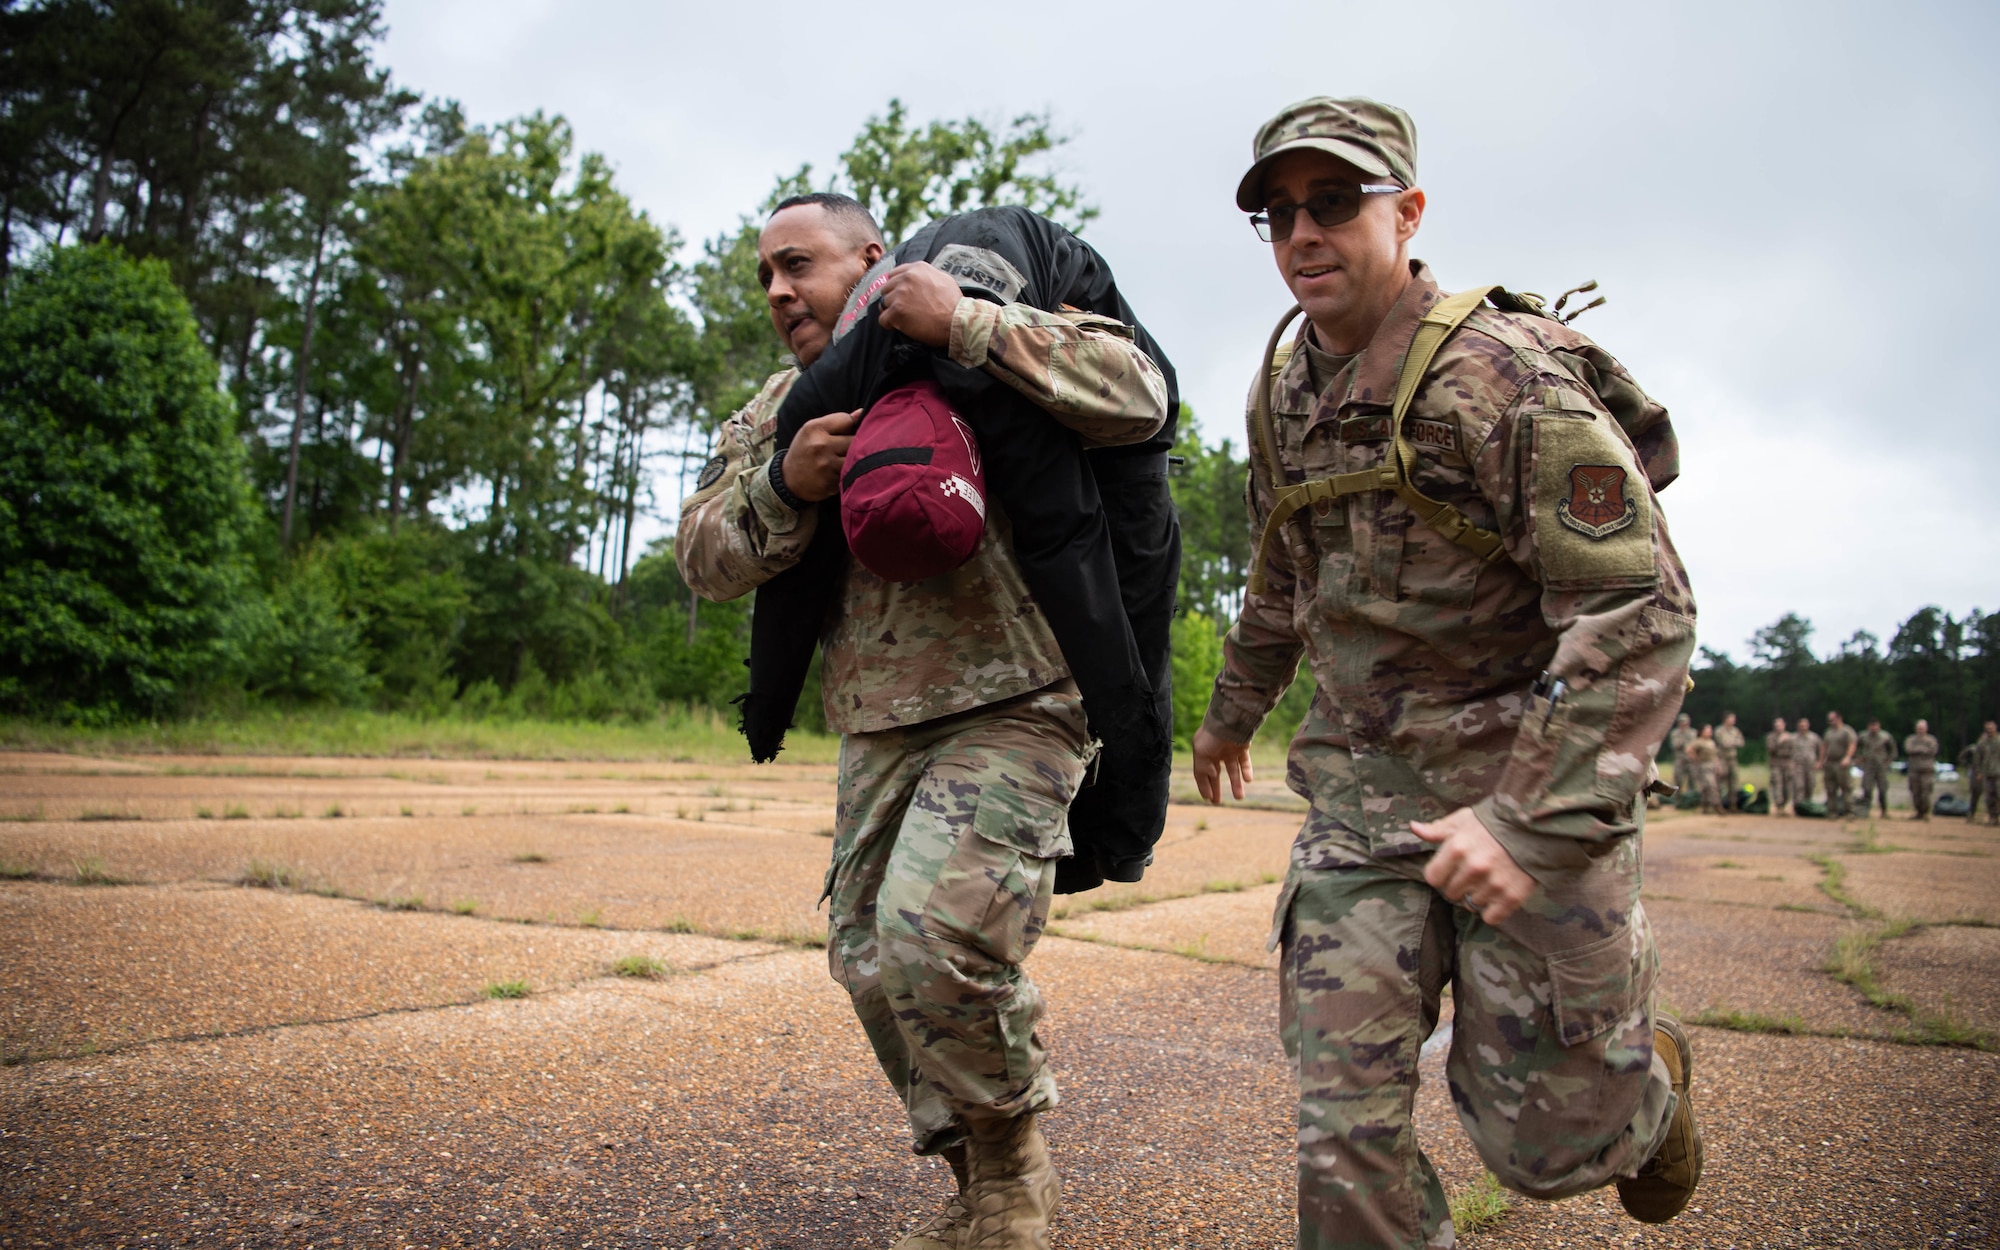 Staff Sgt. Roderick R. Pearson Jr., 2nd Civil Engineer Squadron emergency management plans noncommissioned officer in charge, and Master Sgt. Richard J. McGinnis, 2nd CES commander's support staff superintendent, carry a dummy during a 2nd CES training exercise at Barksdale Air Force Base, Louisiana, May 20, 2021. The exercise showcased contingency skills such as: land navigation, self-aid buddy care and chemical, biological, radiological and nuclear preparedness. (U.S. Air Force photo by Senior Airman Jacob B. Wrightsman)